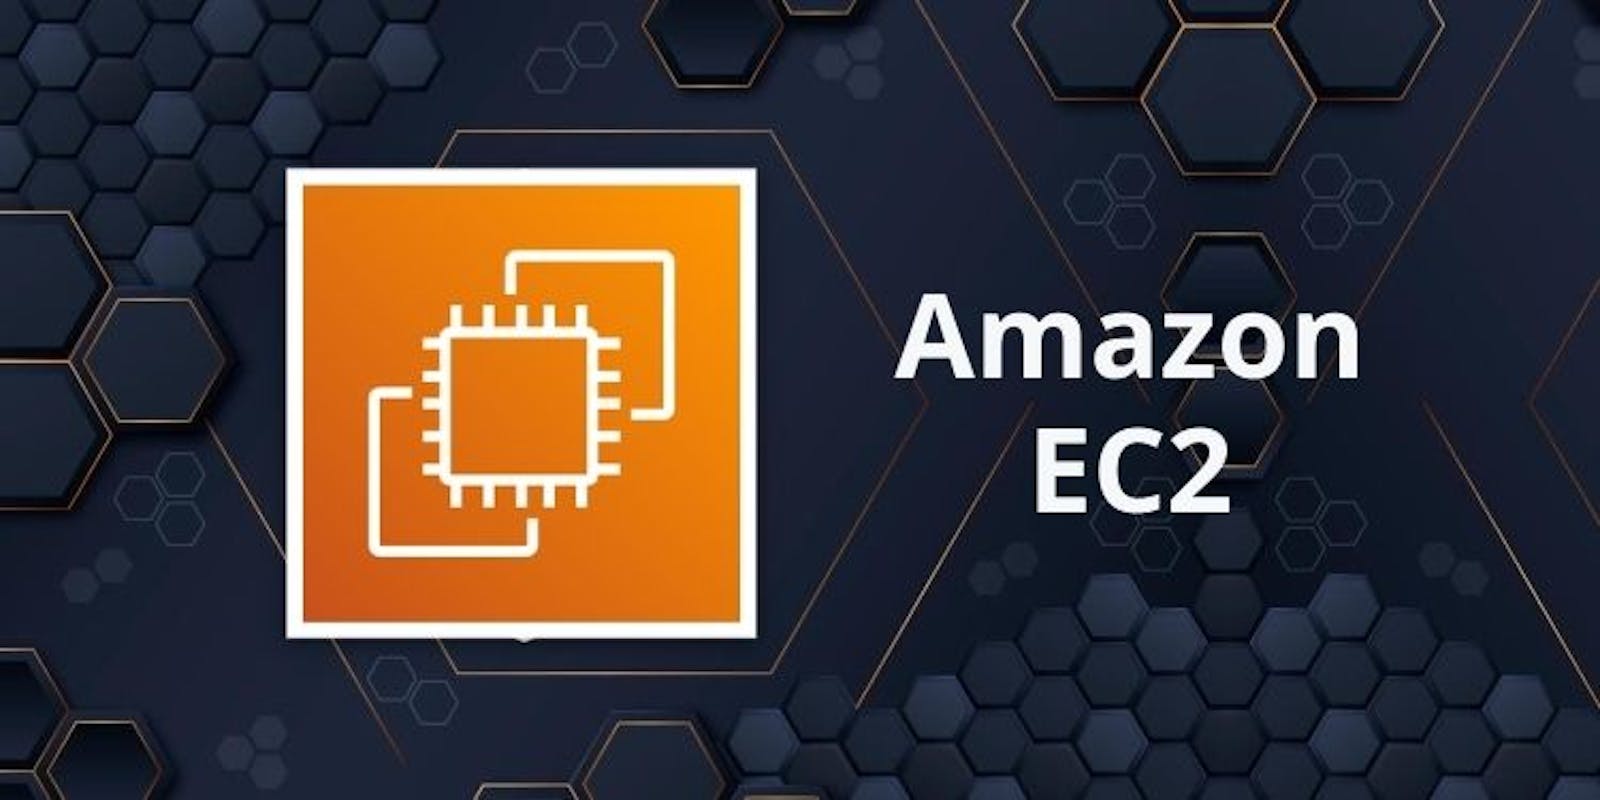 Step-by-Step Guide to Deploying an EC2 Instance on AWS and Connecting it to Your Computer